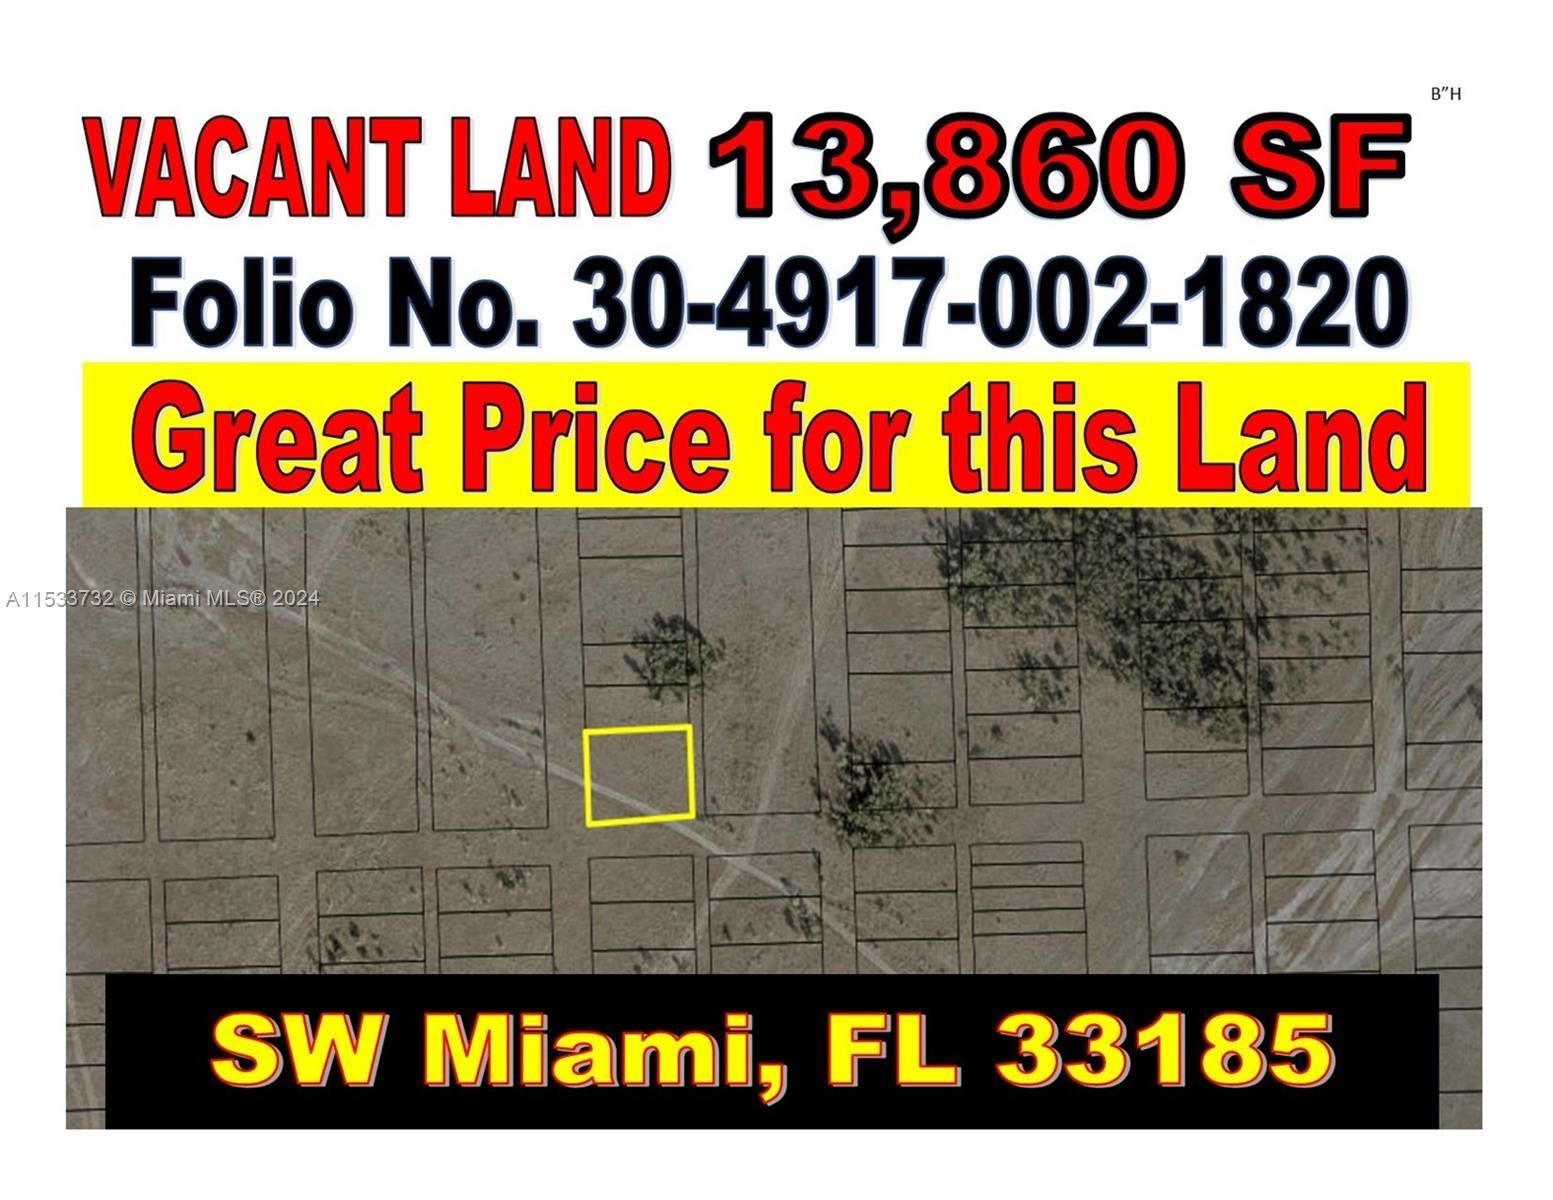 Photo of Land S Of SW 157 Ave Homestead in Miami, FL